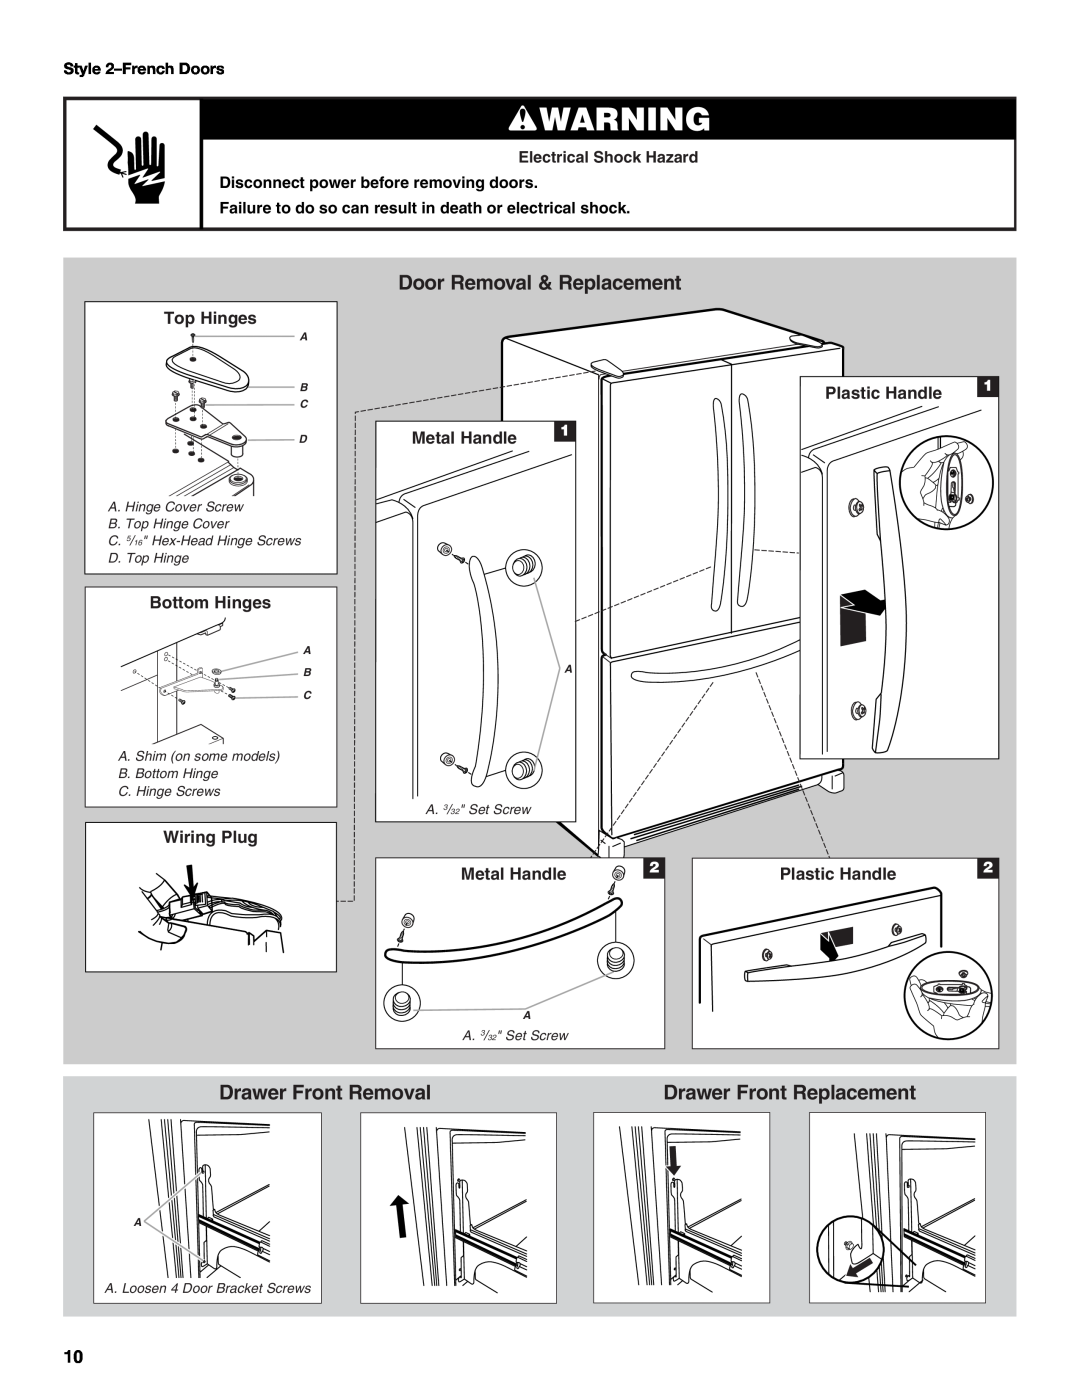 Maytag MBL2556KES Drawer Front Removal, Drawer Front Replacement, Top Hinges, Bottom Hinges, Wiring Plug, Metal Handle 